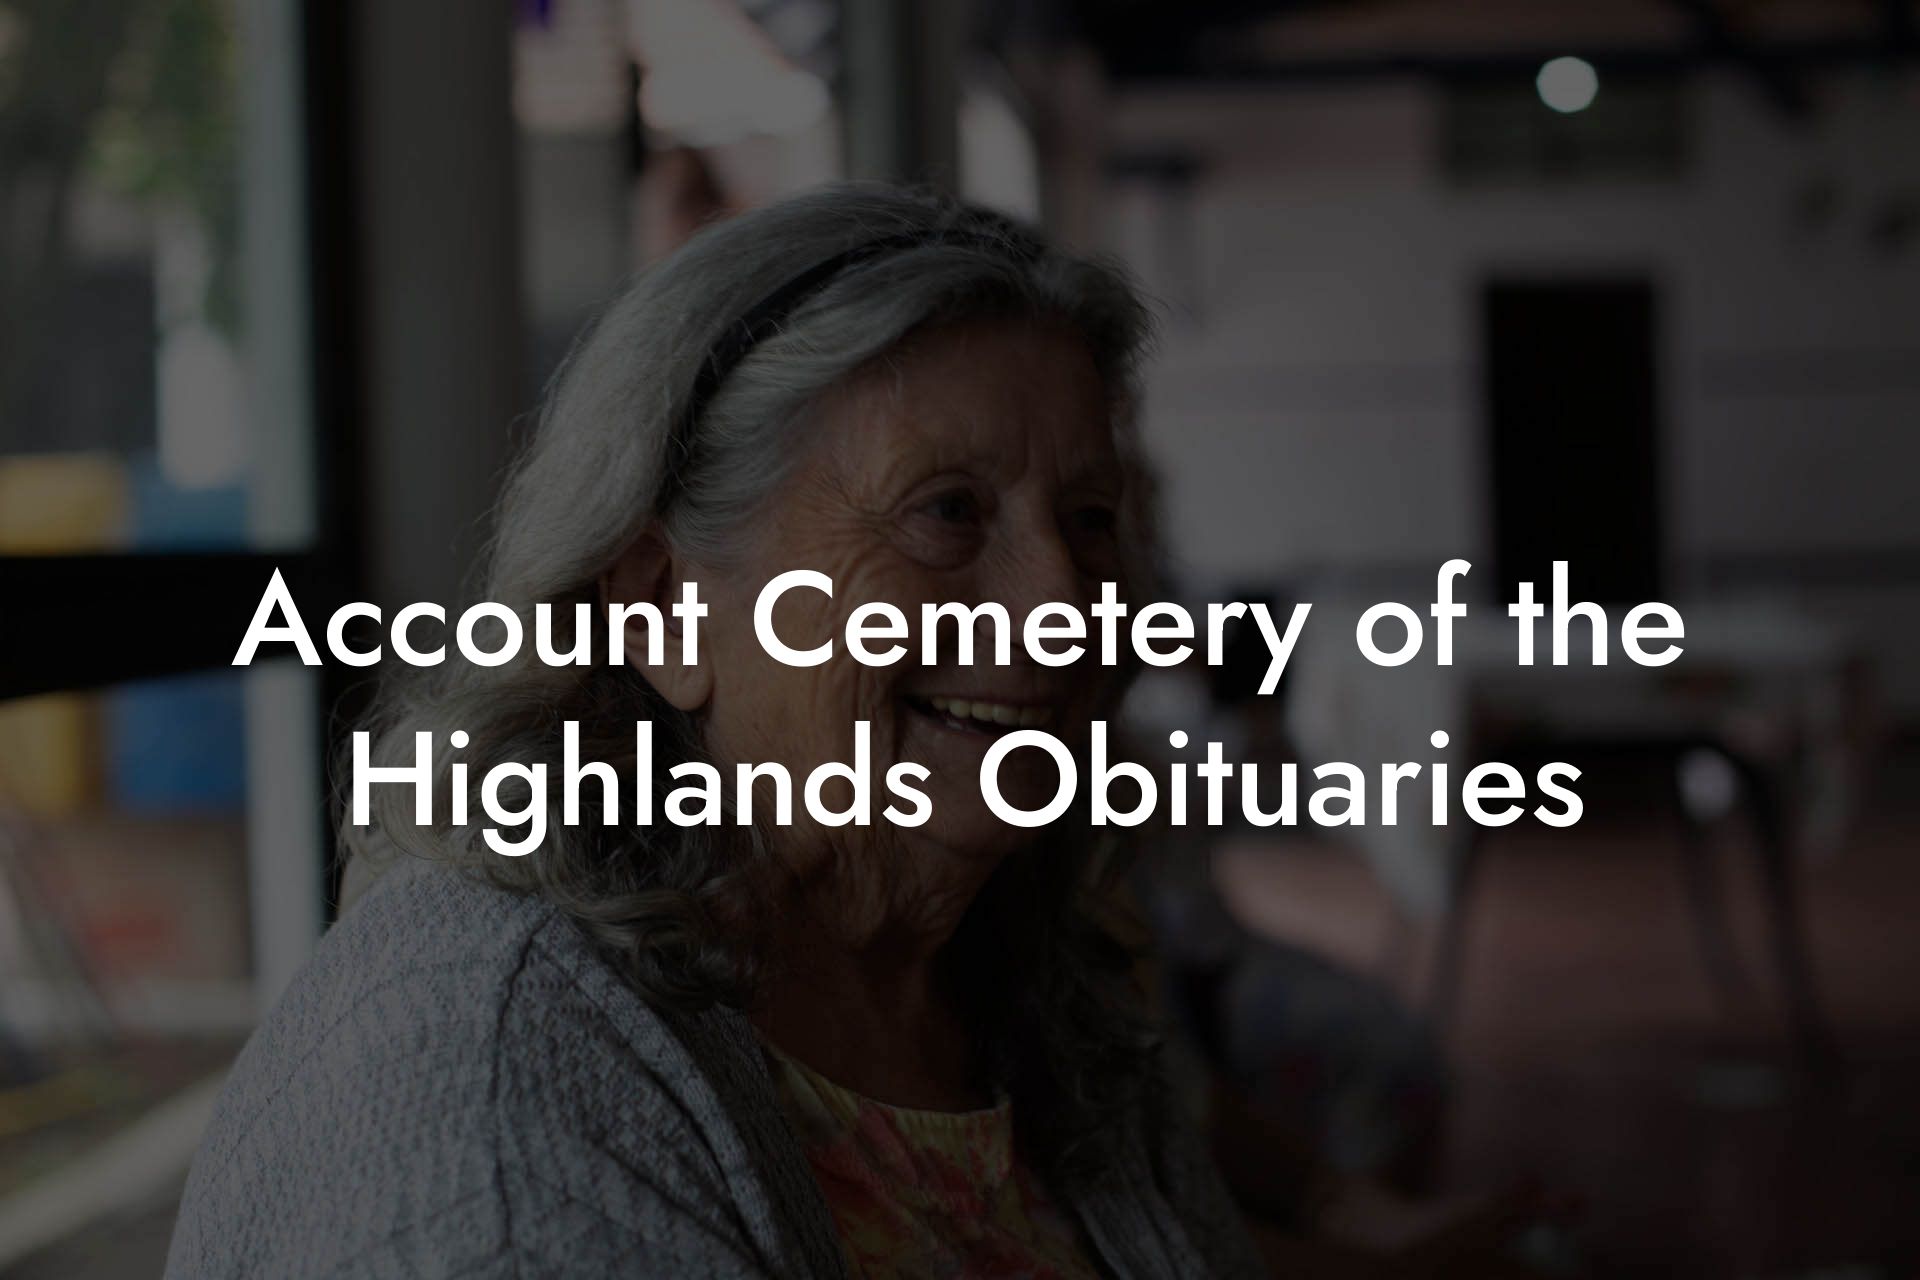 Account Cemetery of the Highlands Obituaries